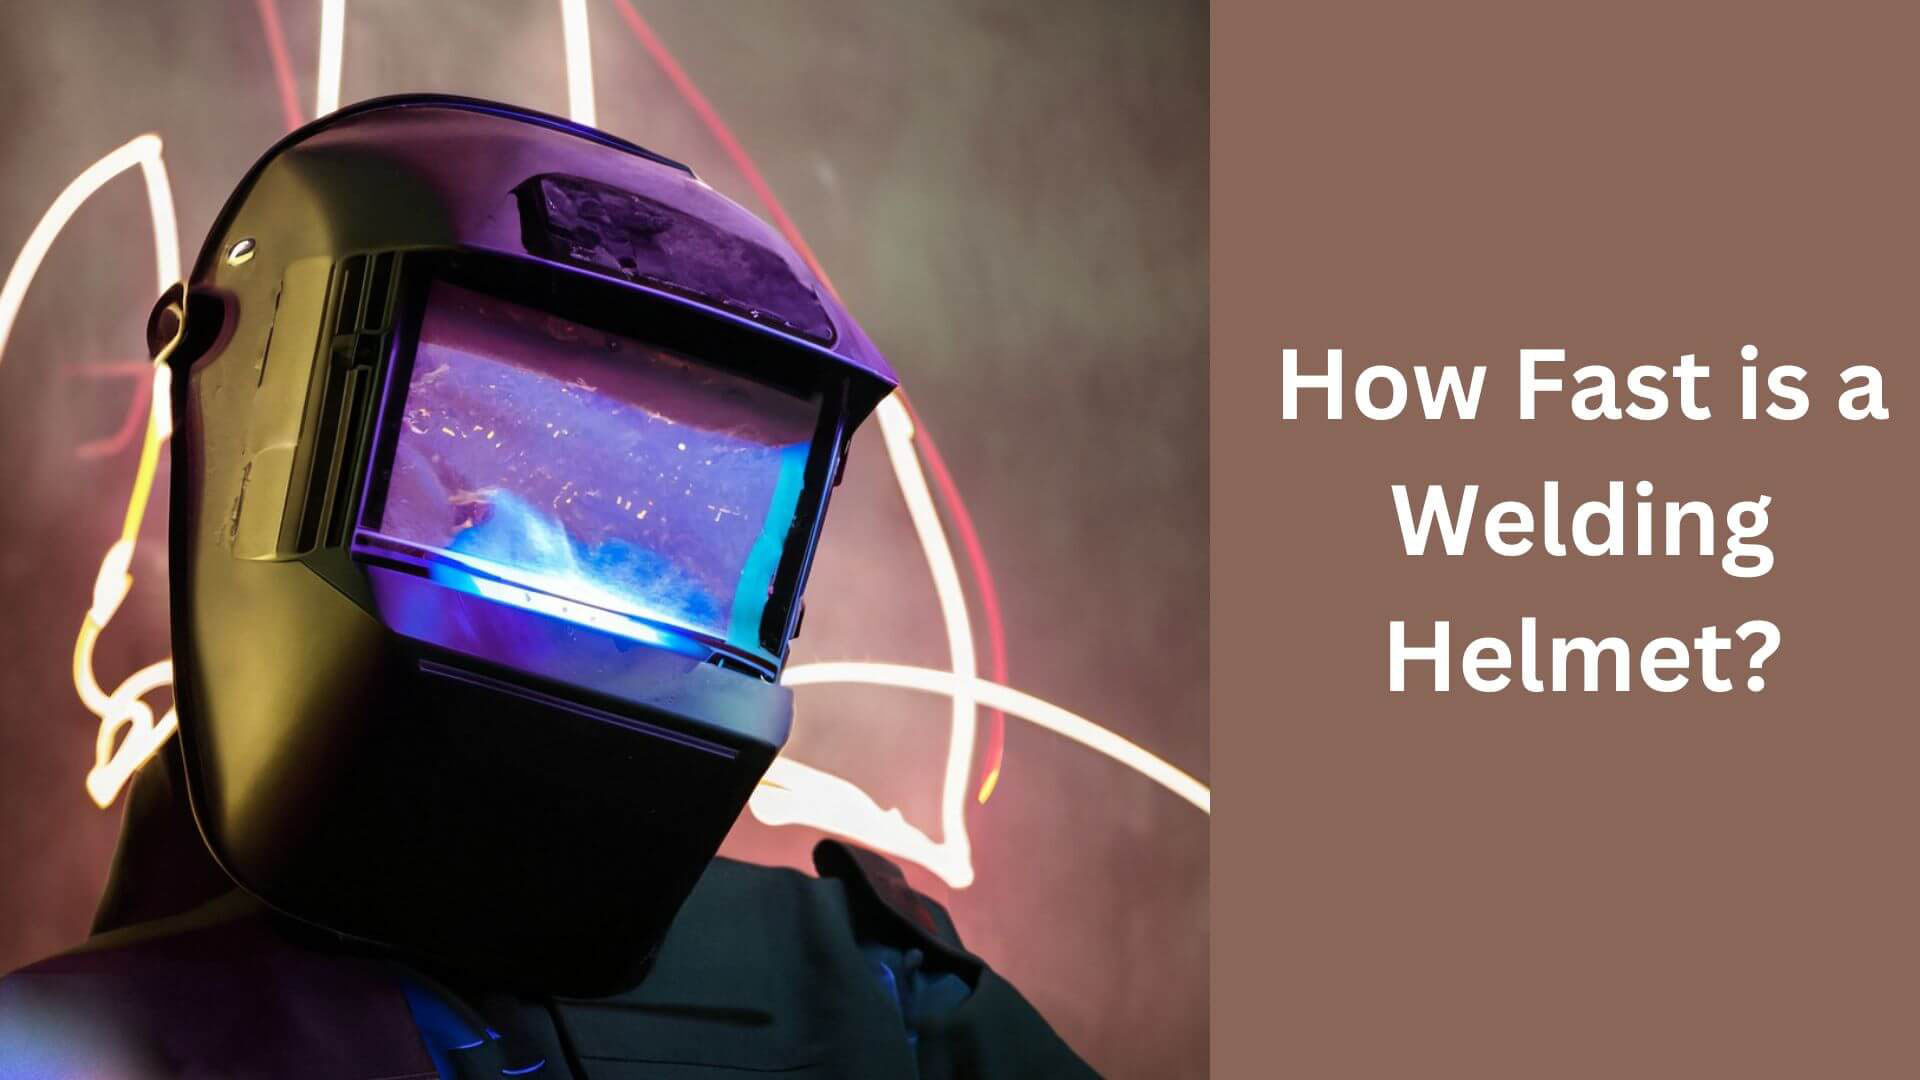 How Fast is a Welding Helmet? Balancing Safety and Efficiency